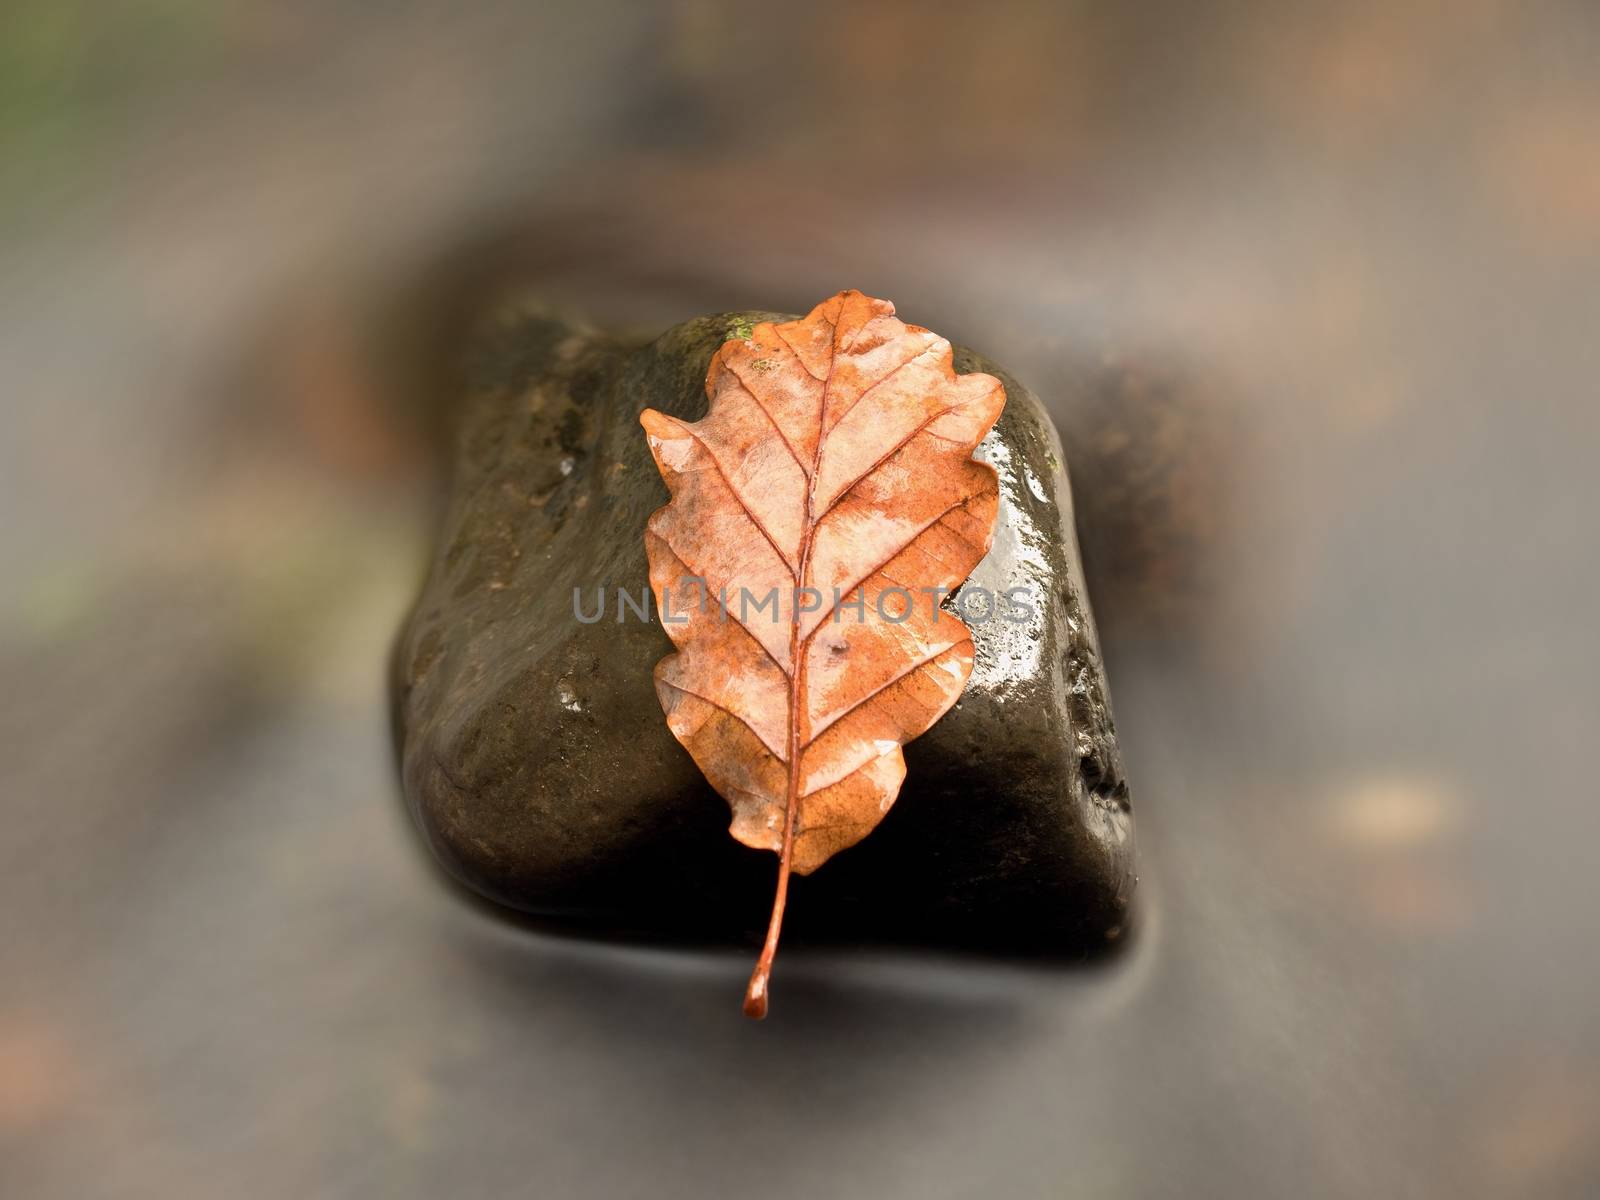 Fall oak leaf. Caught rotten old oak leaf on stone in blurred water of mountain river. Autumn symbol, life circle.